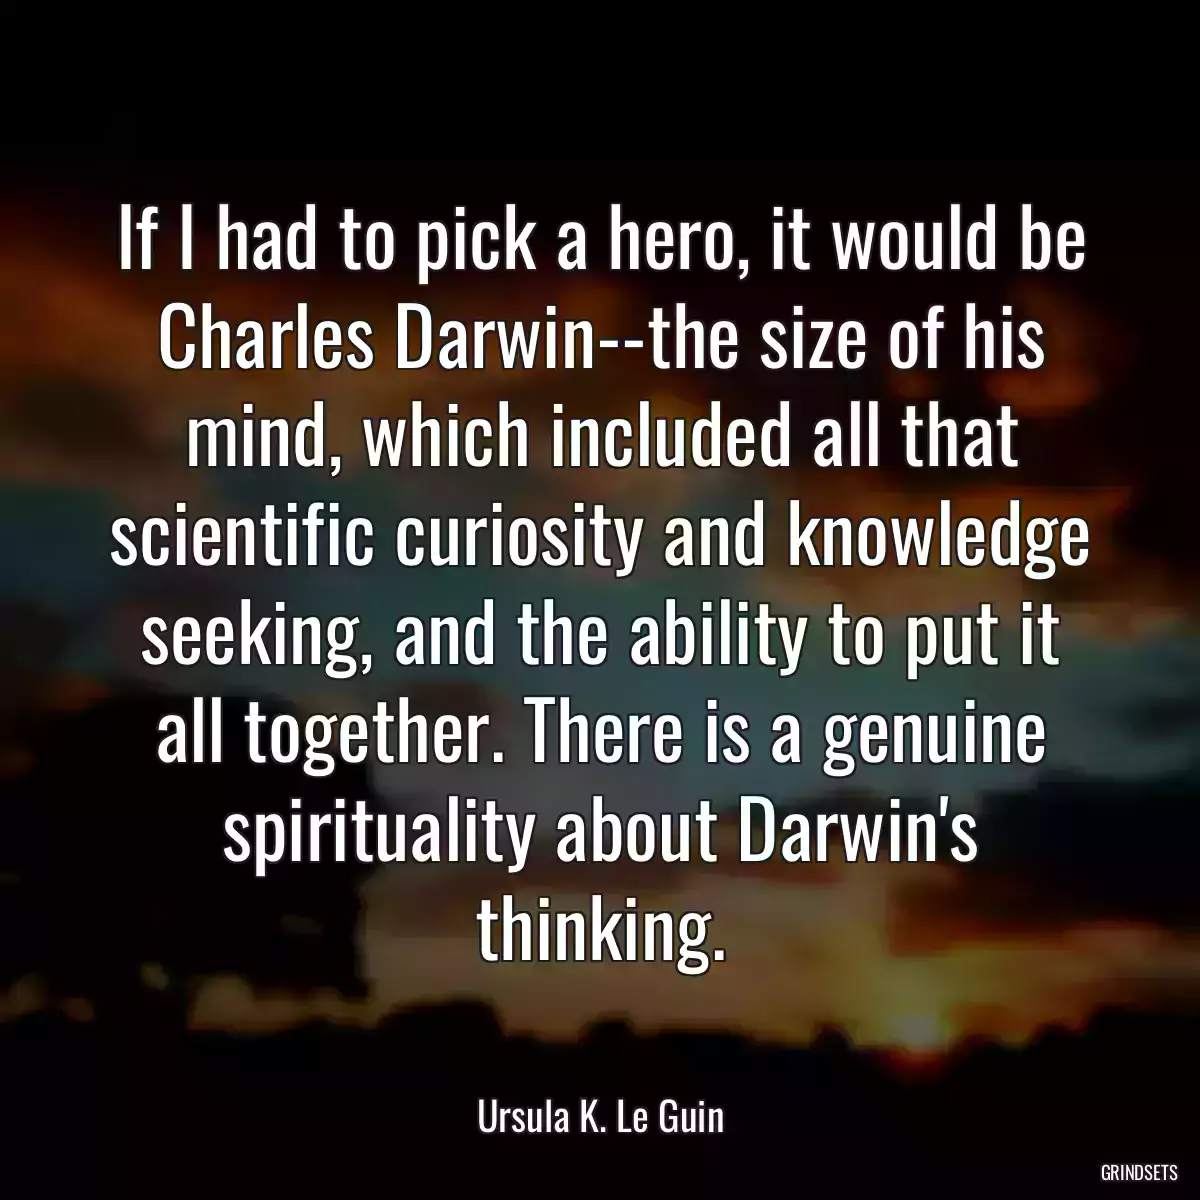 If I had to pick a hero, it would be Charles Darwin--the size of his mind, which included all that scientific curiosity and knowledge seeking, and the ability to put it all together. There is a genuine spirituality about Darwin\'s thinking.